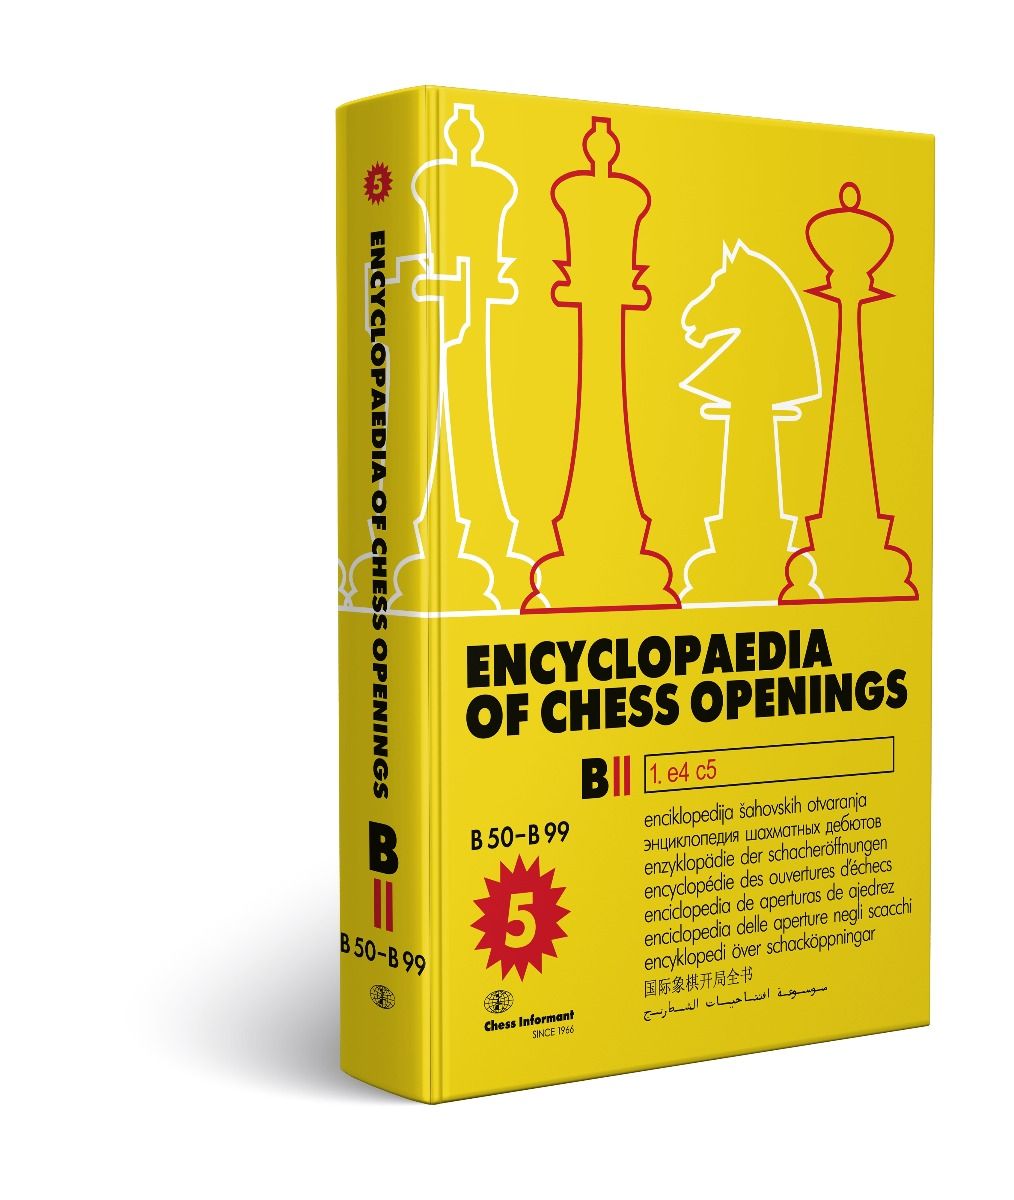 Access This Comprehensive Online Chess Encyclopedia